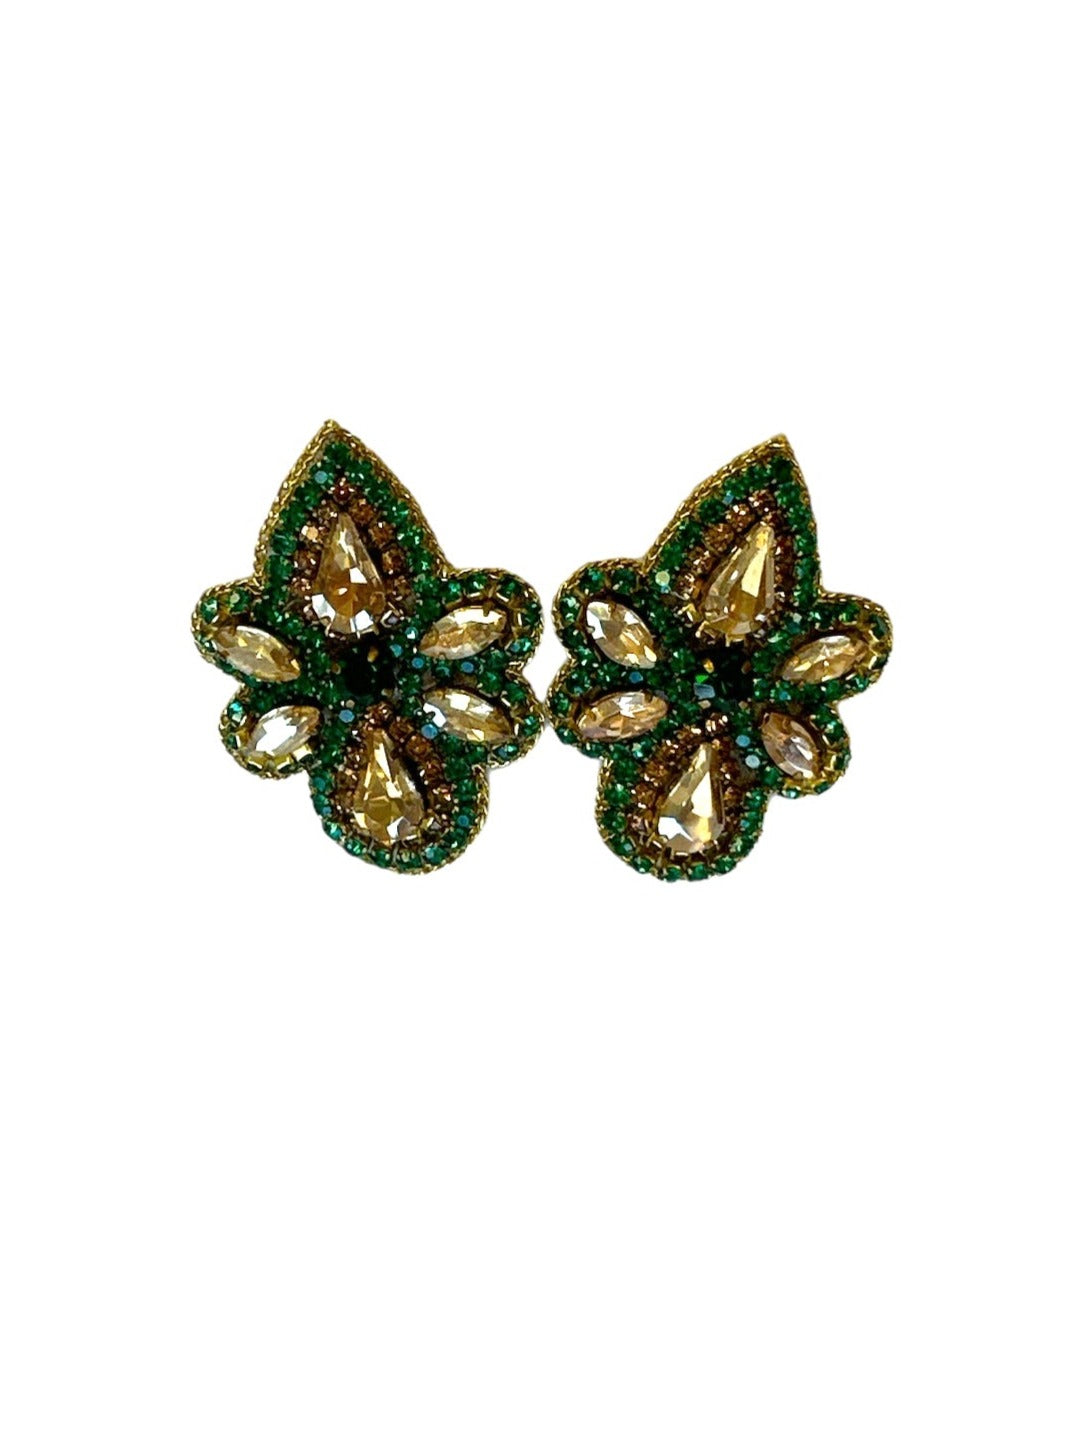 Hailey Earrings - Green and Gold